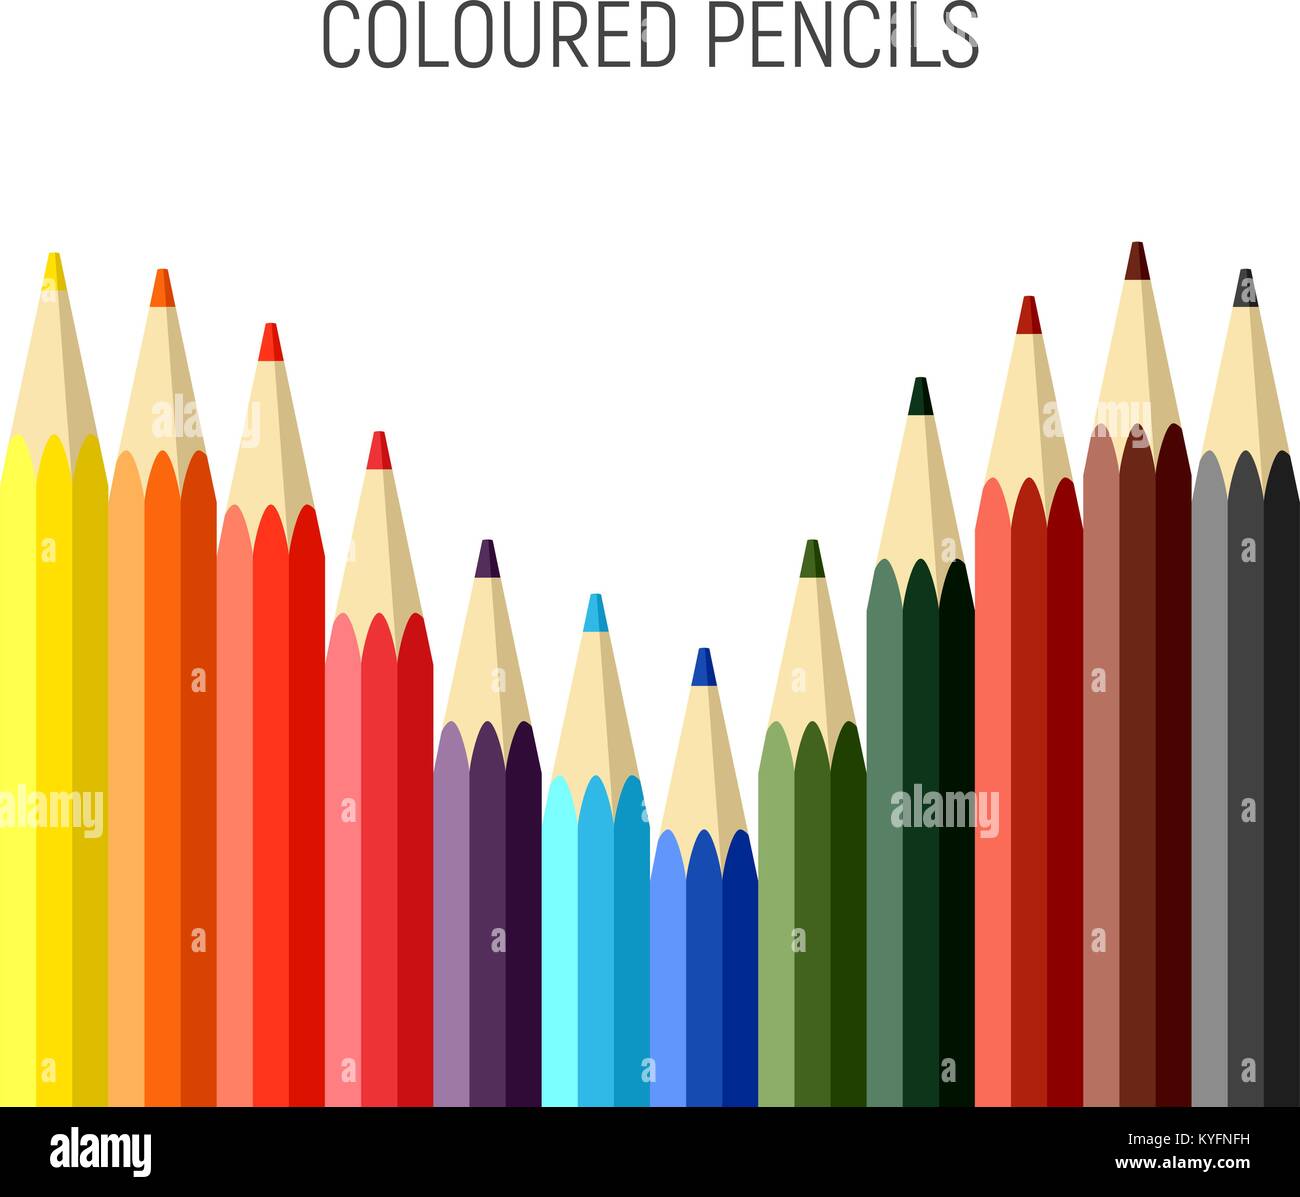 set of 12 colored pencils. vector illustration Stock Vector